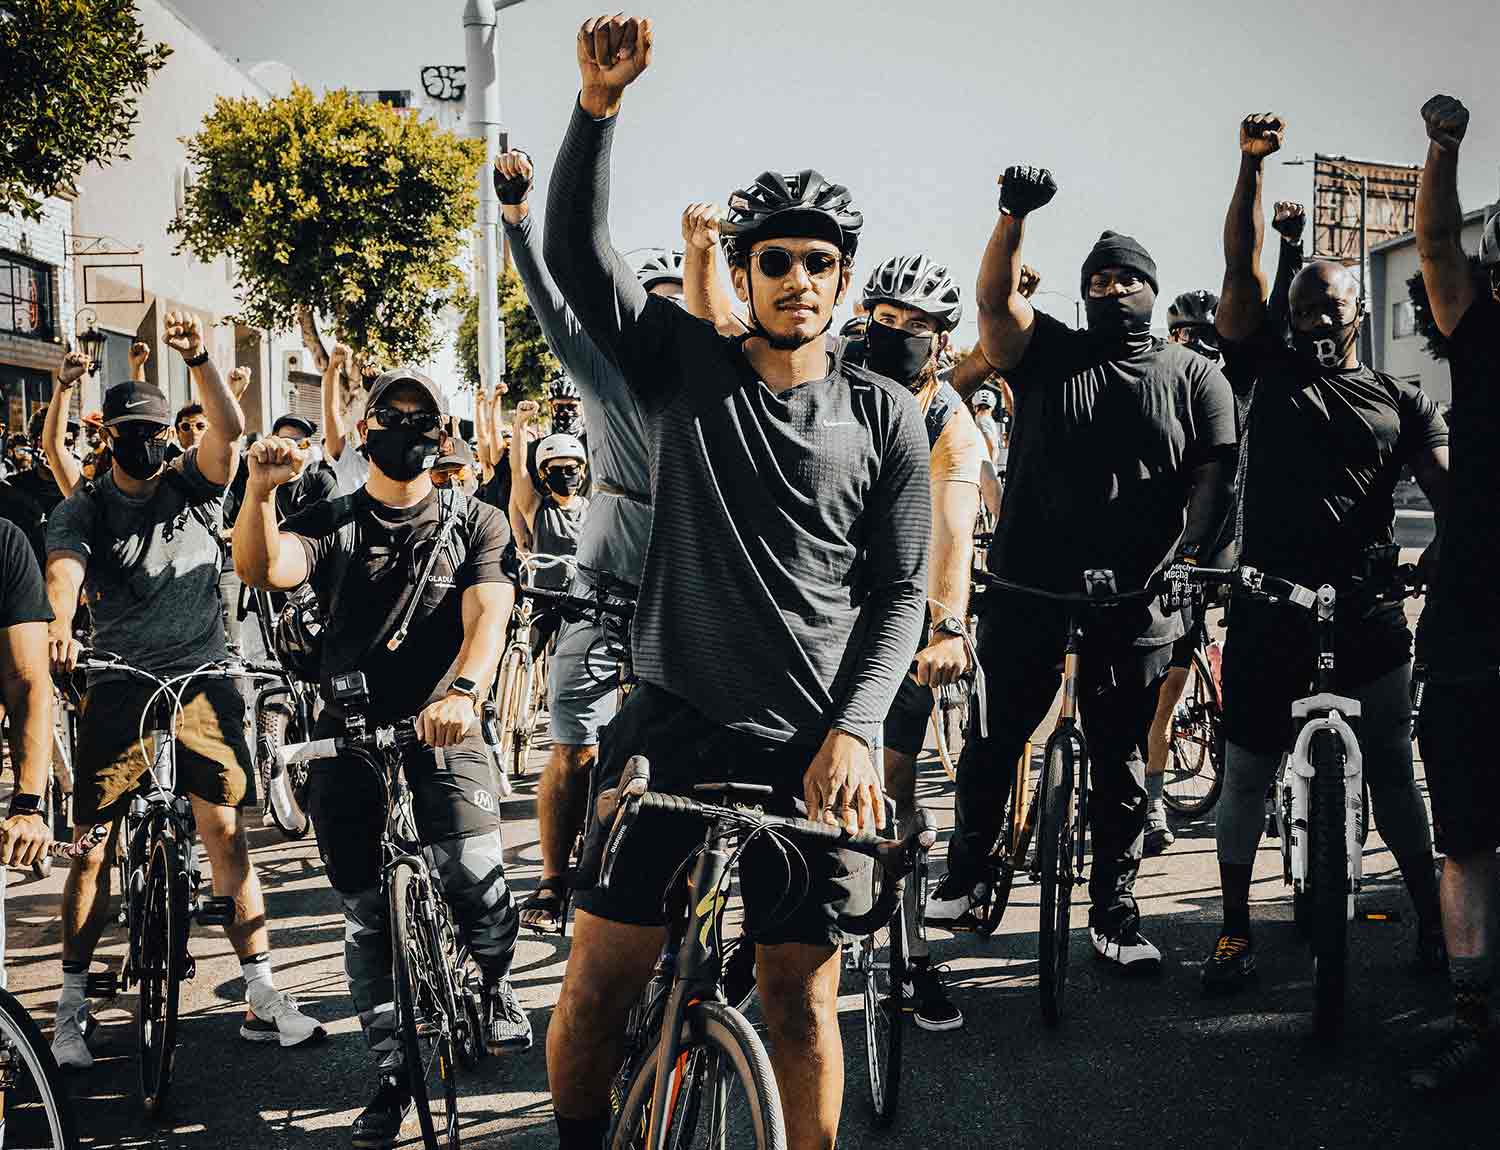 Ron Holden on a bike in a crowd with one fist raised 